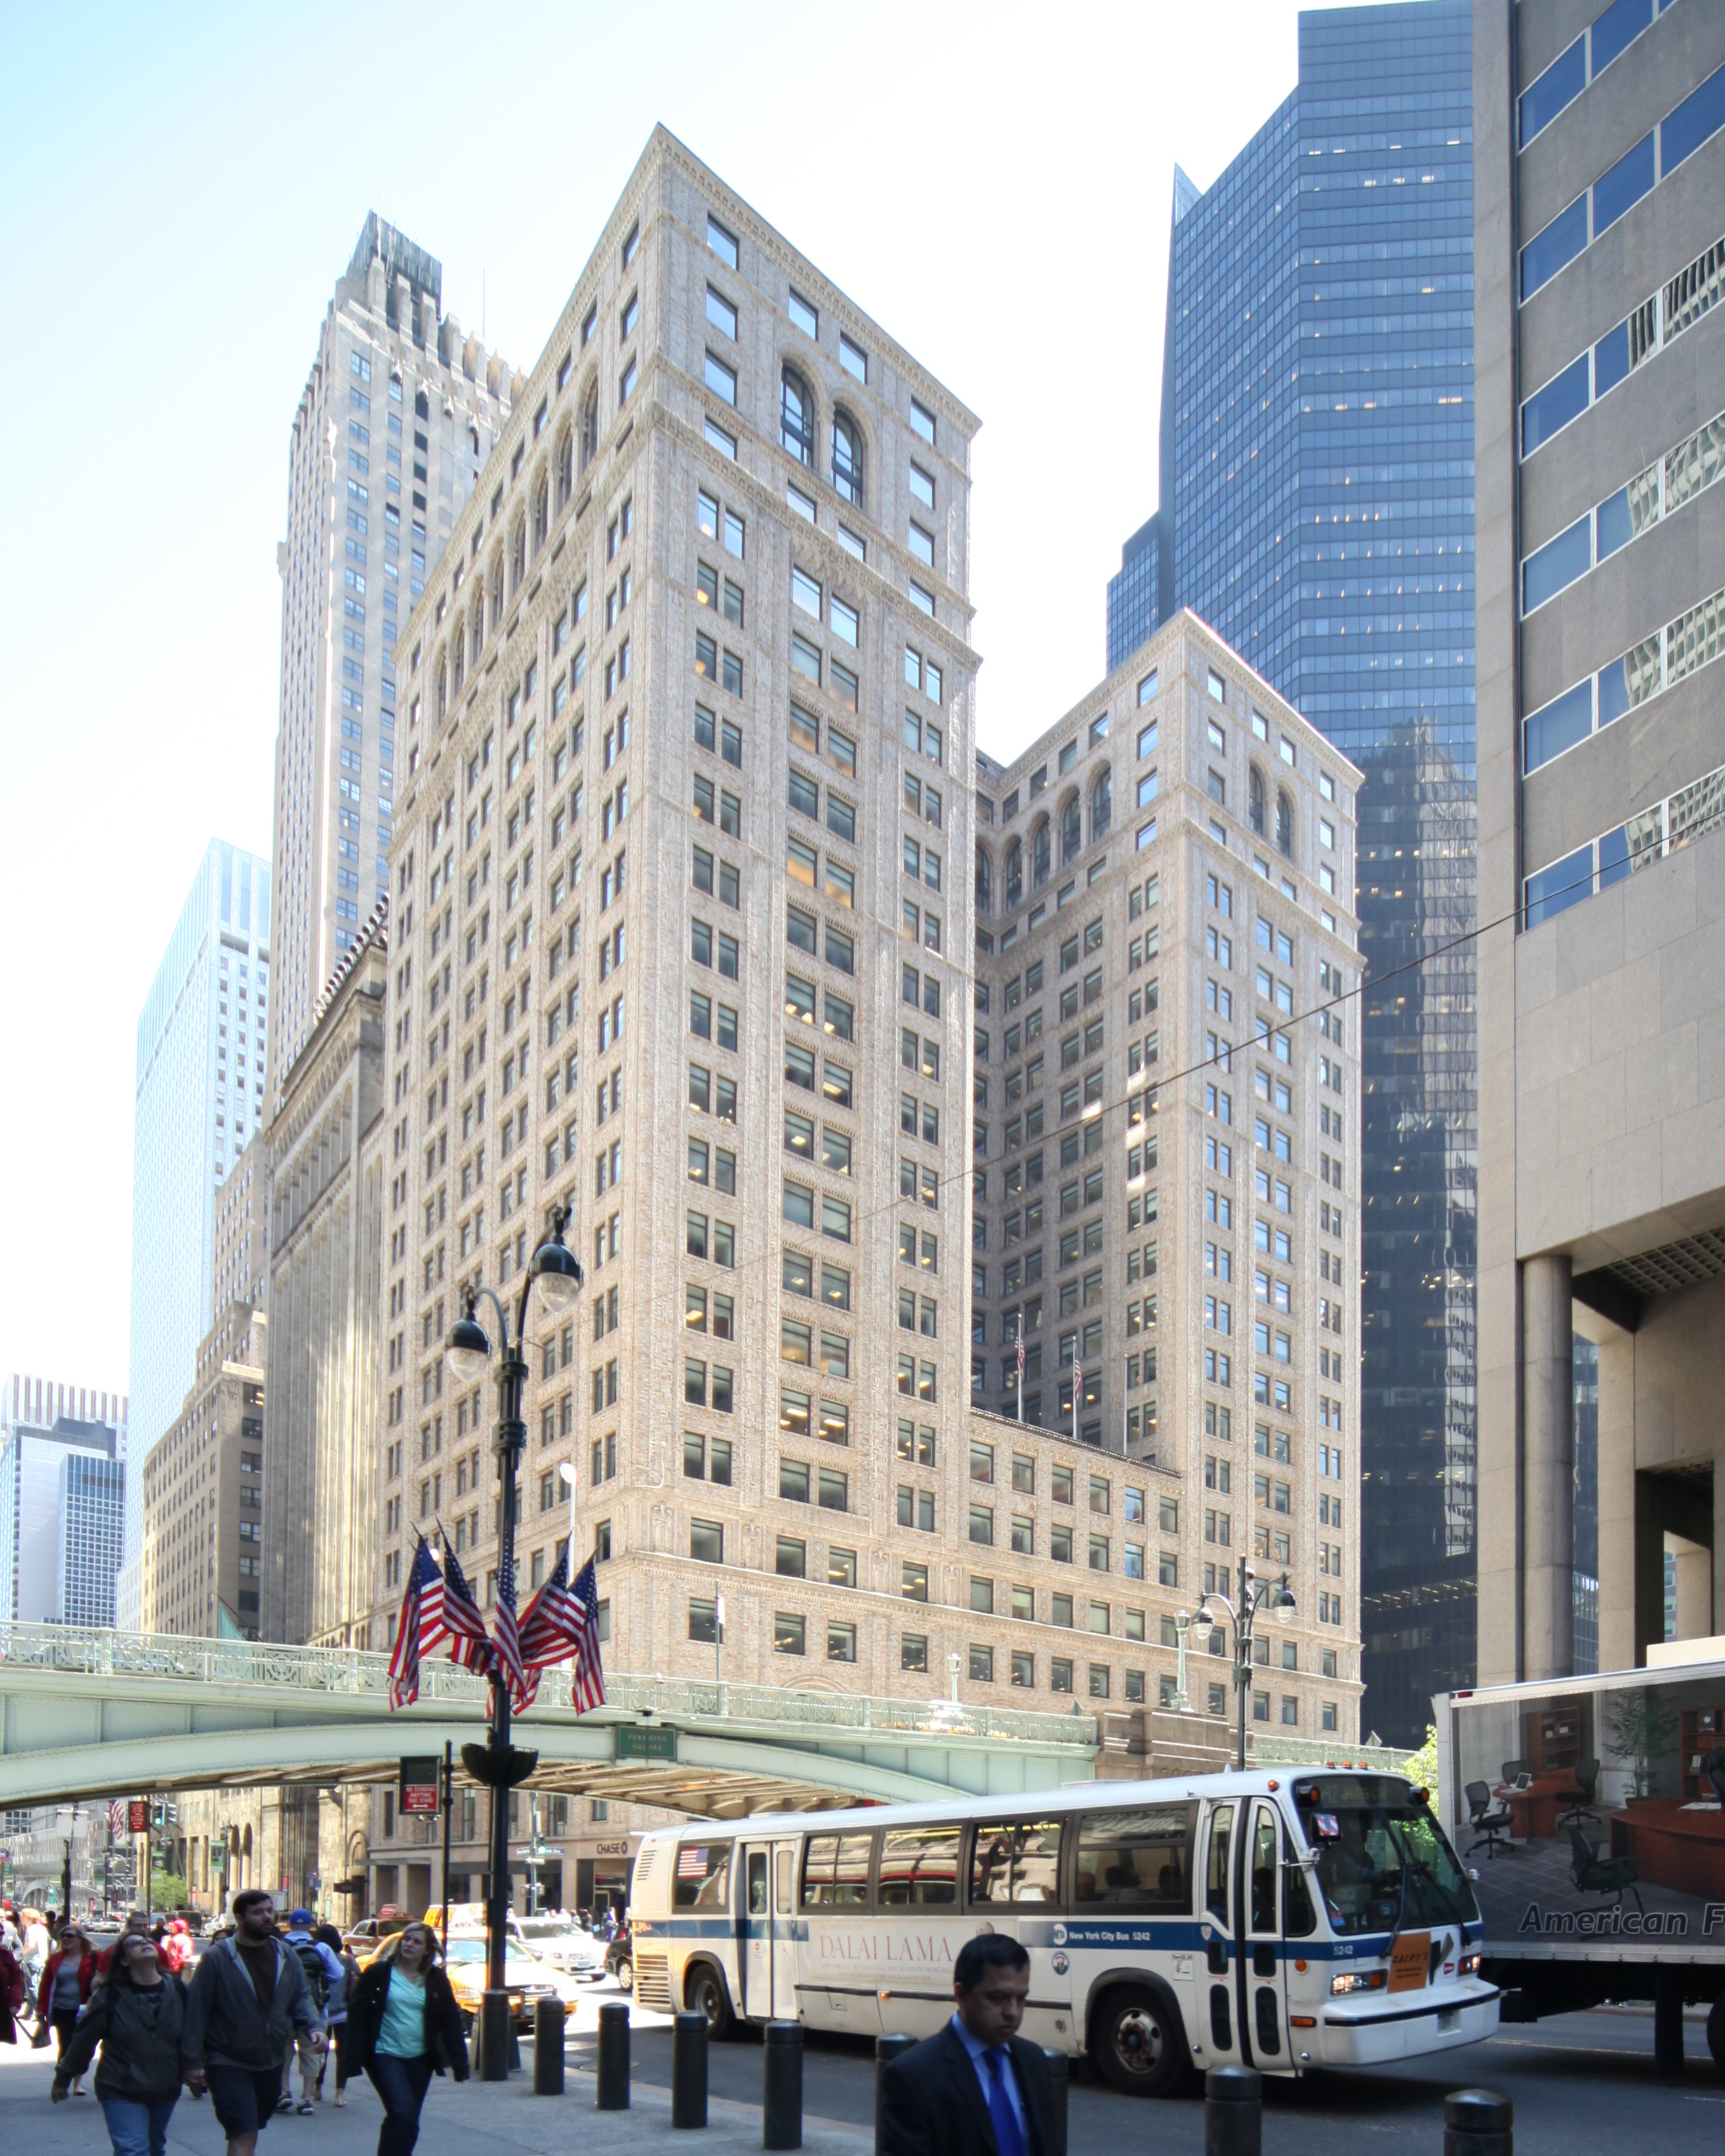 The Pershing Square Building at 125 Park Avenue. LPC photo